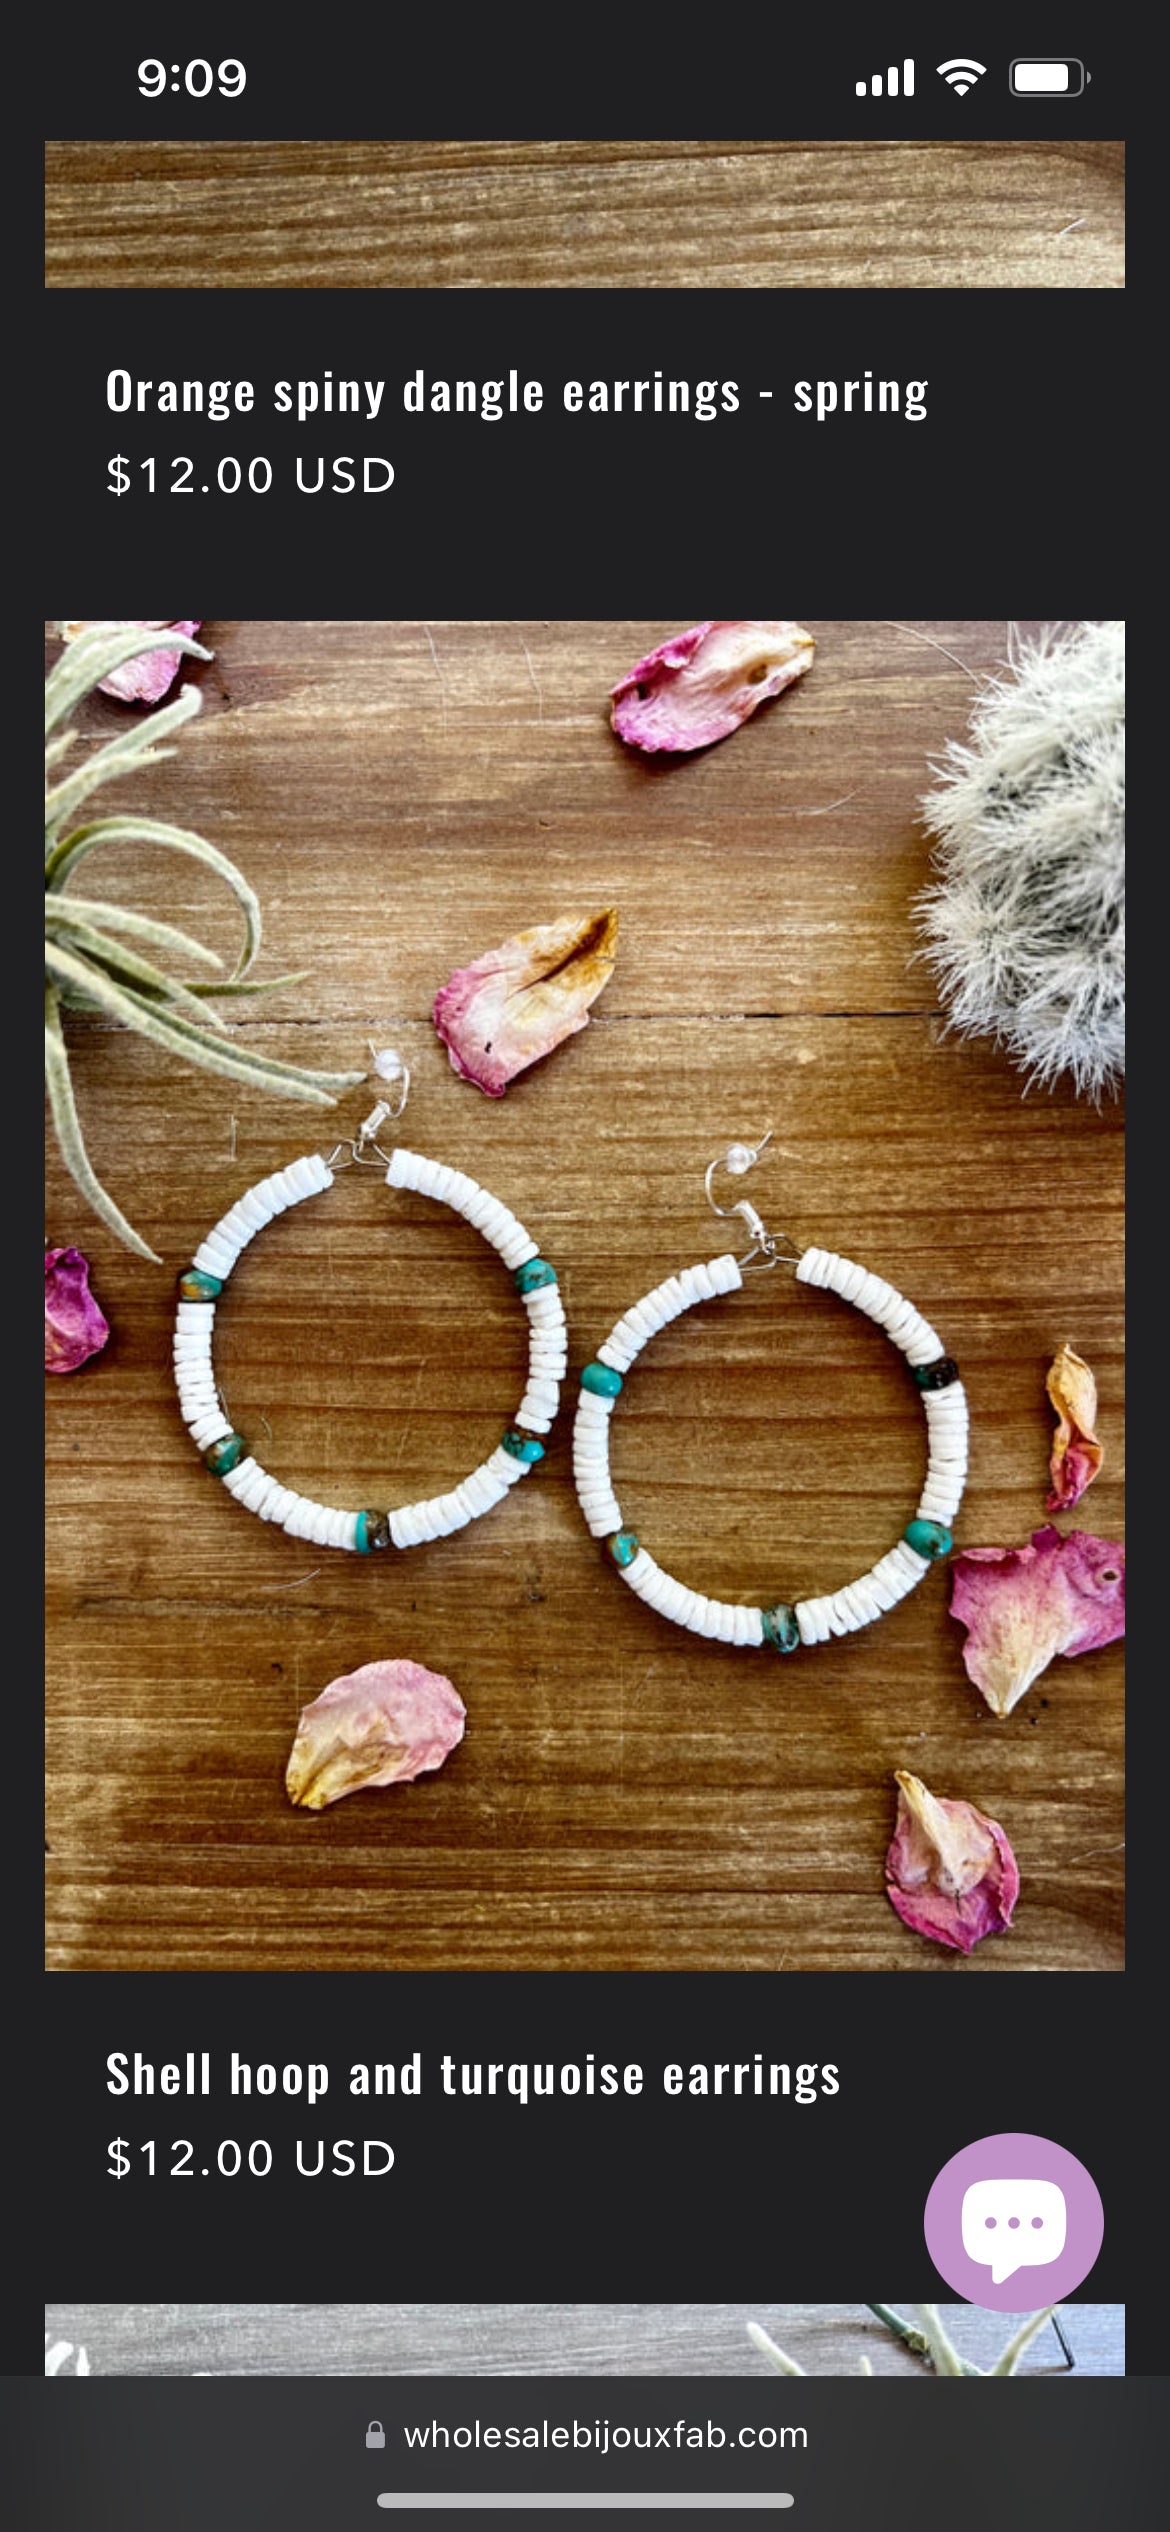 Shell hoop and turquoise earrings